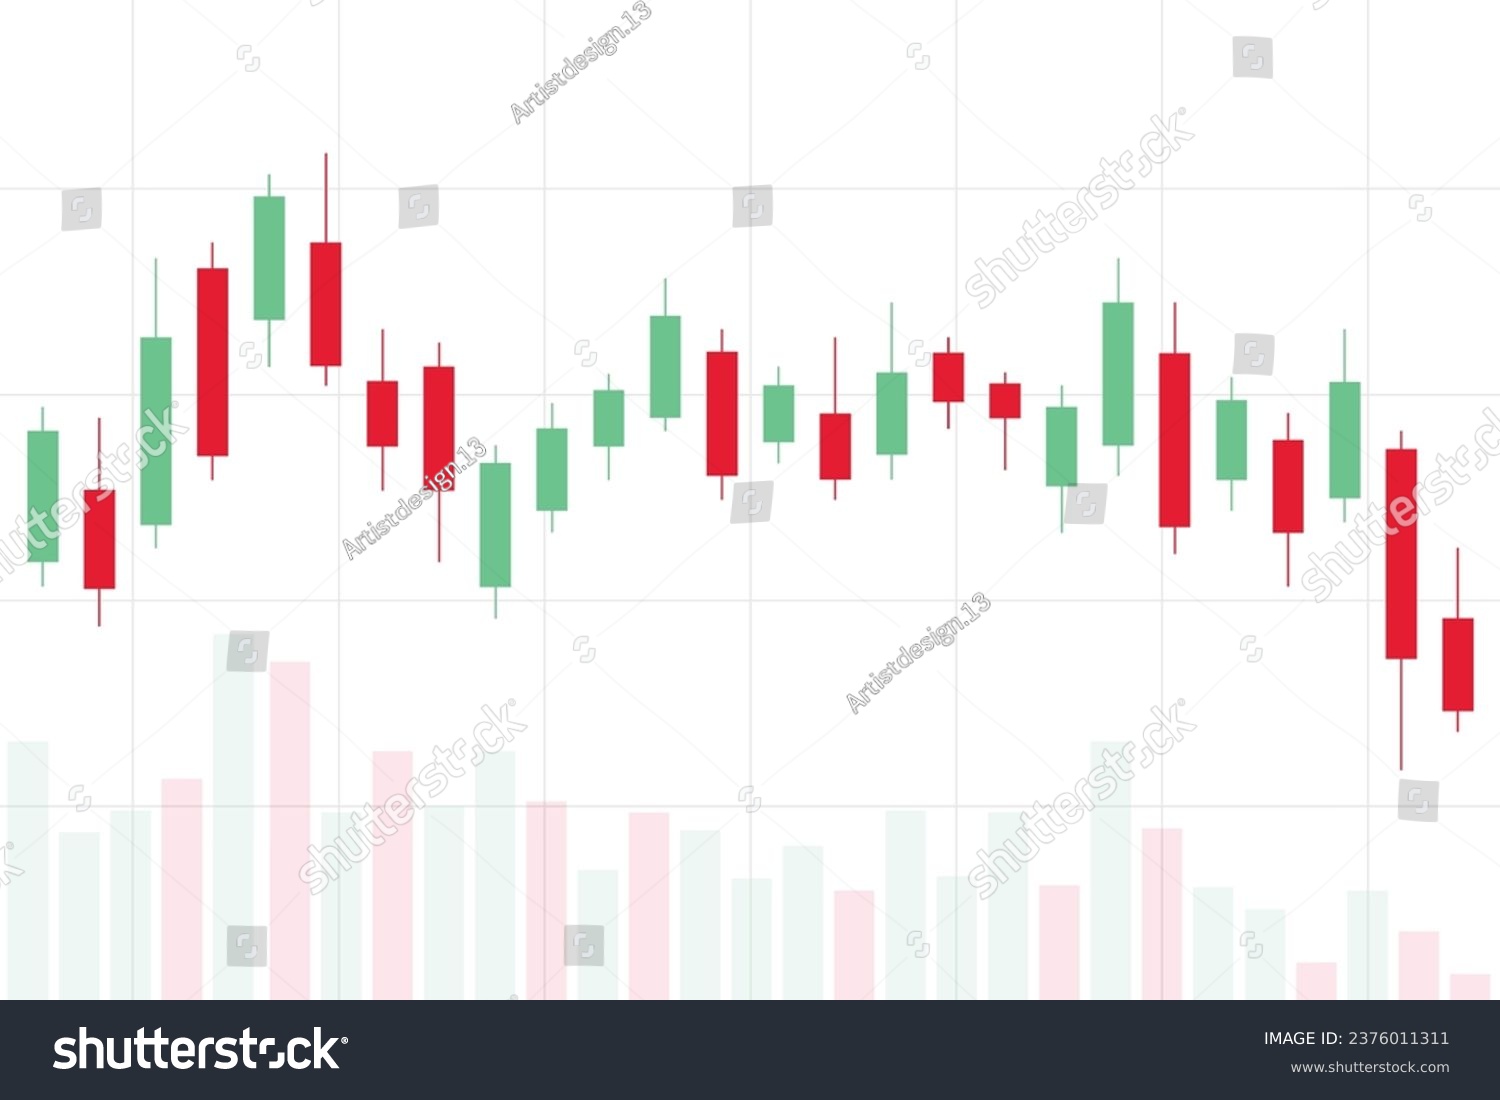 SVG of Business candle stick graph chart of stock market investment trading on white background design. Bullish point, Trend of graph. Vector illustration svg